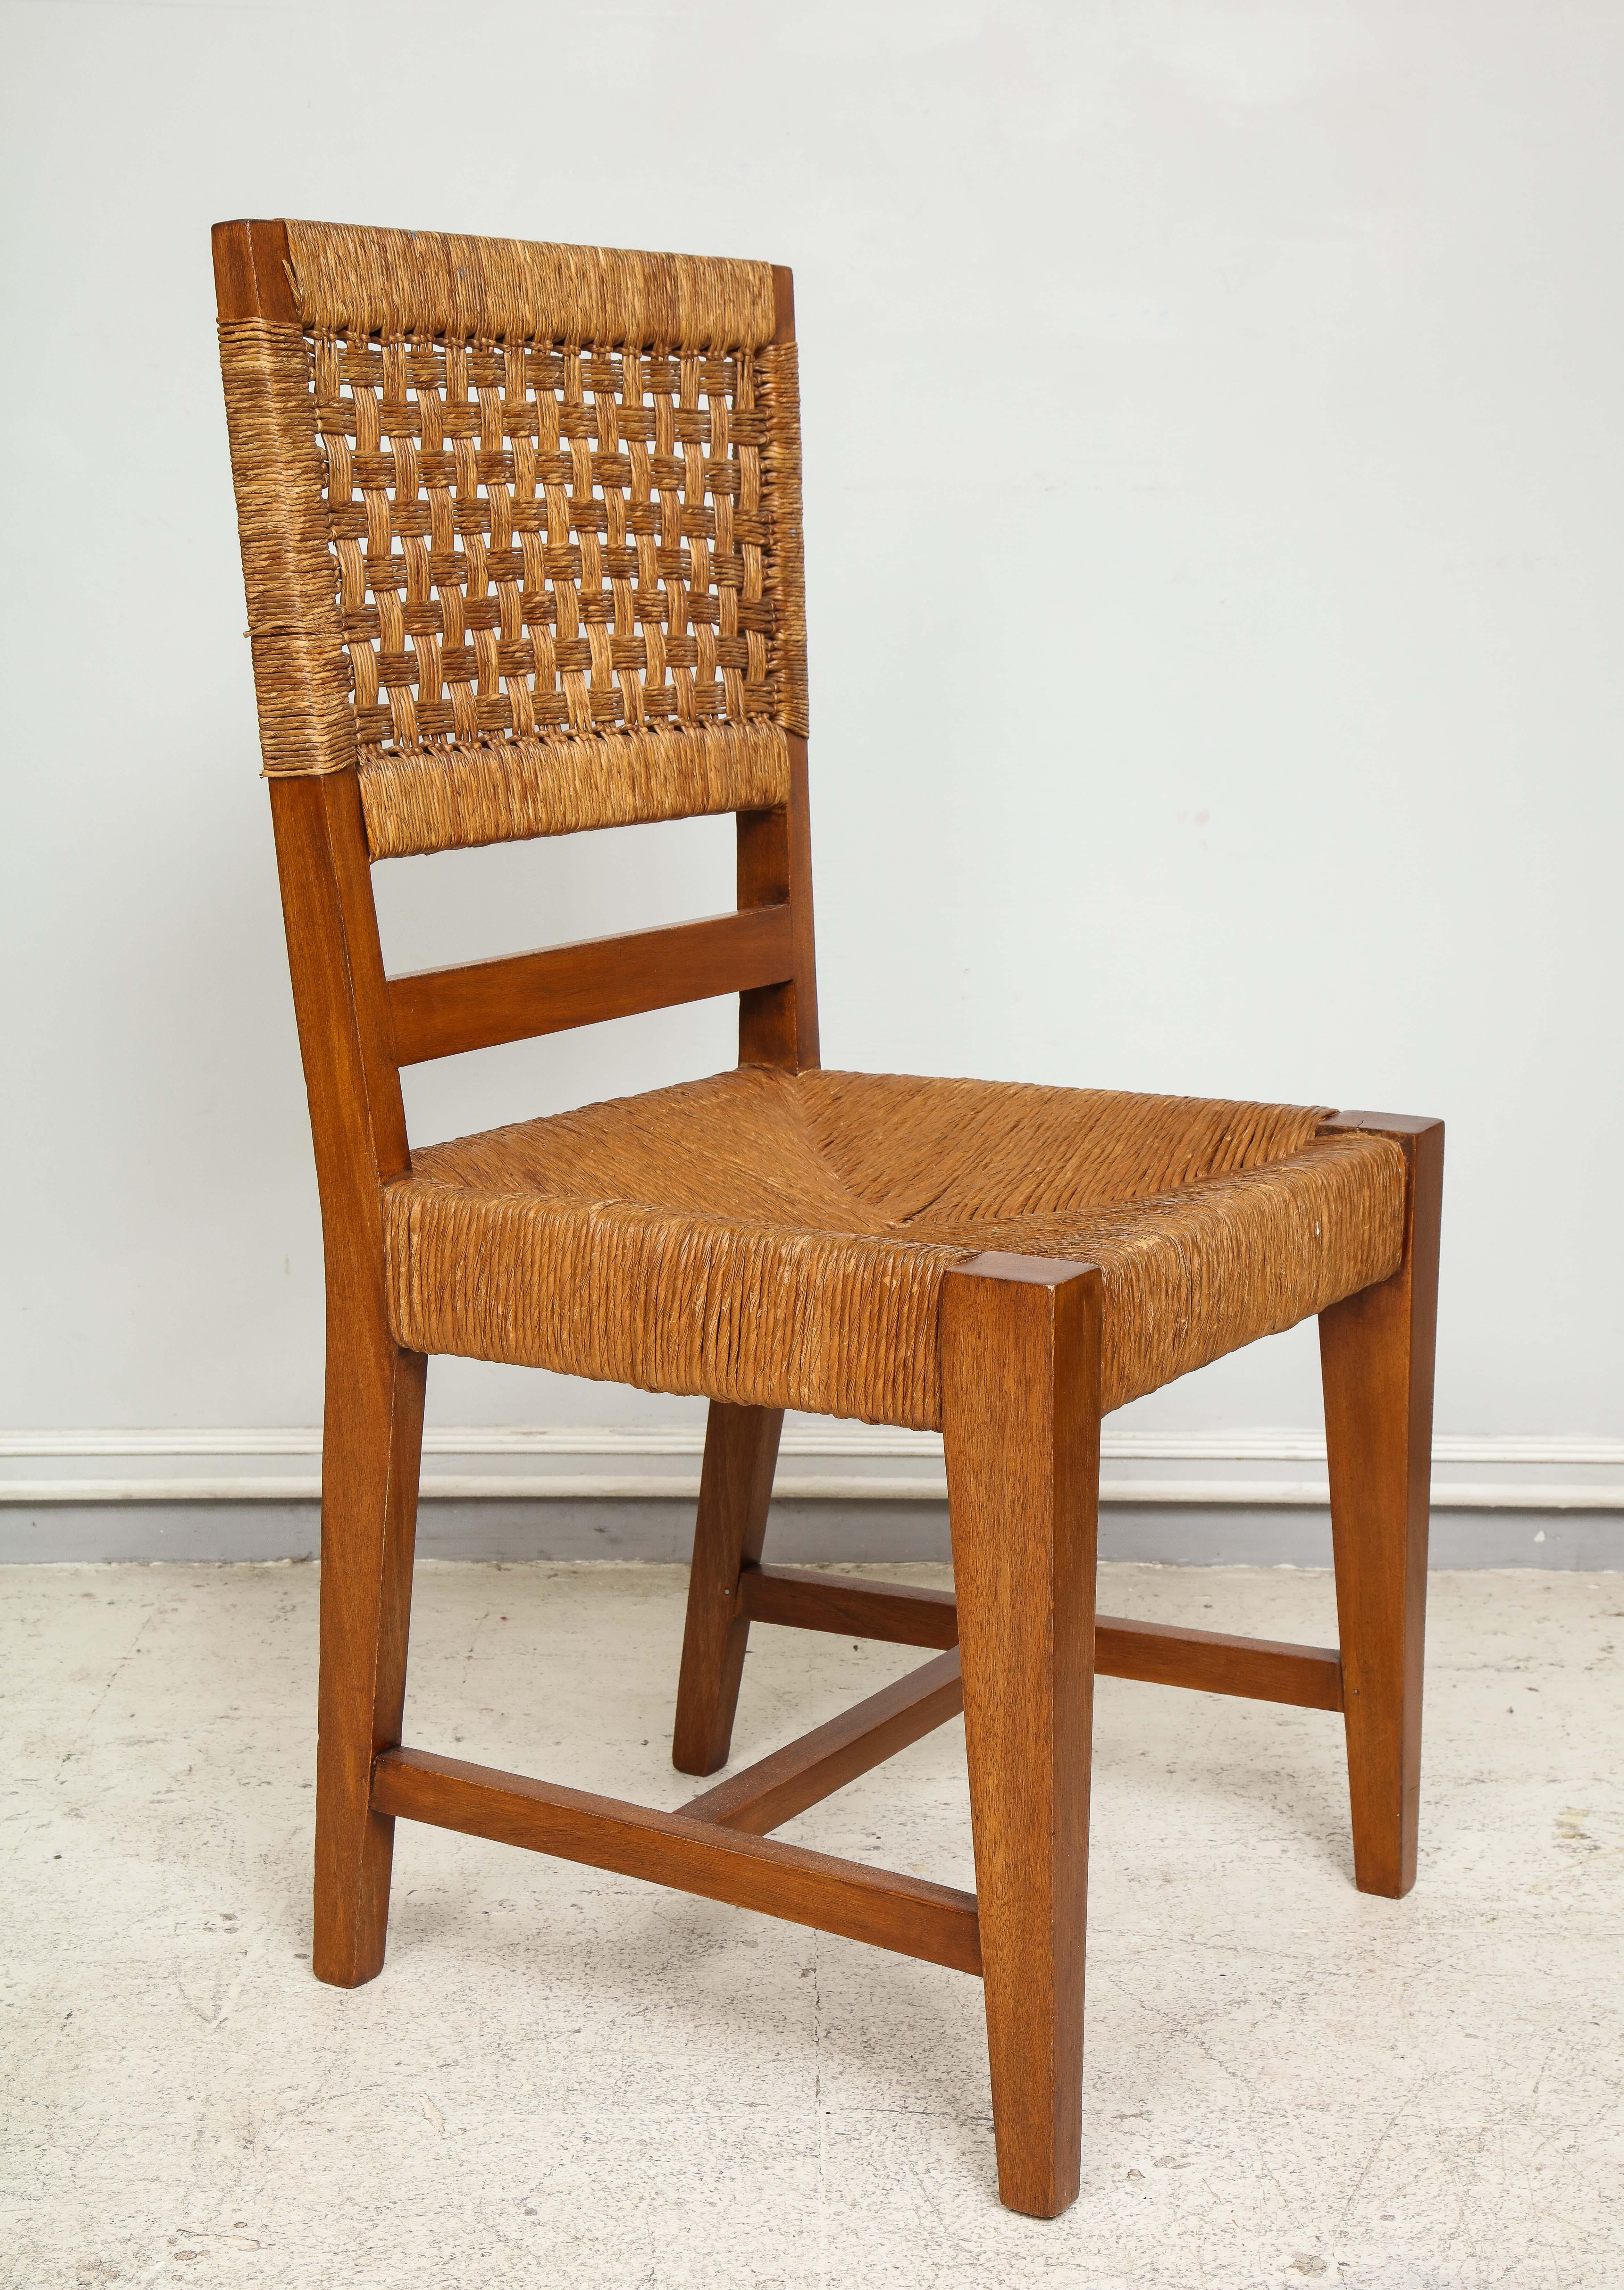 Set of four French caned chairs from circa 1940s-1950s.